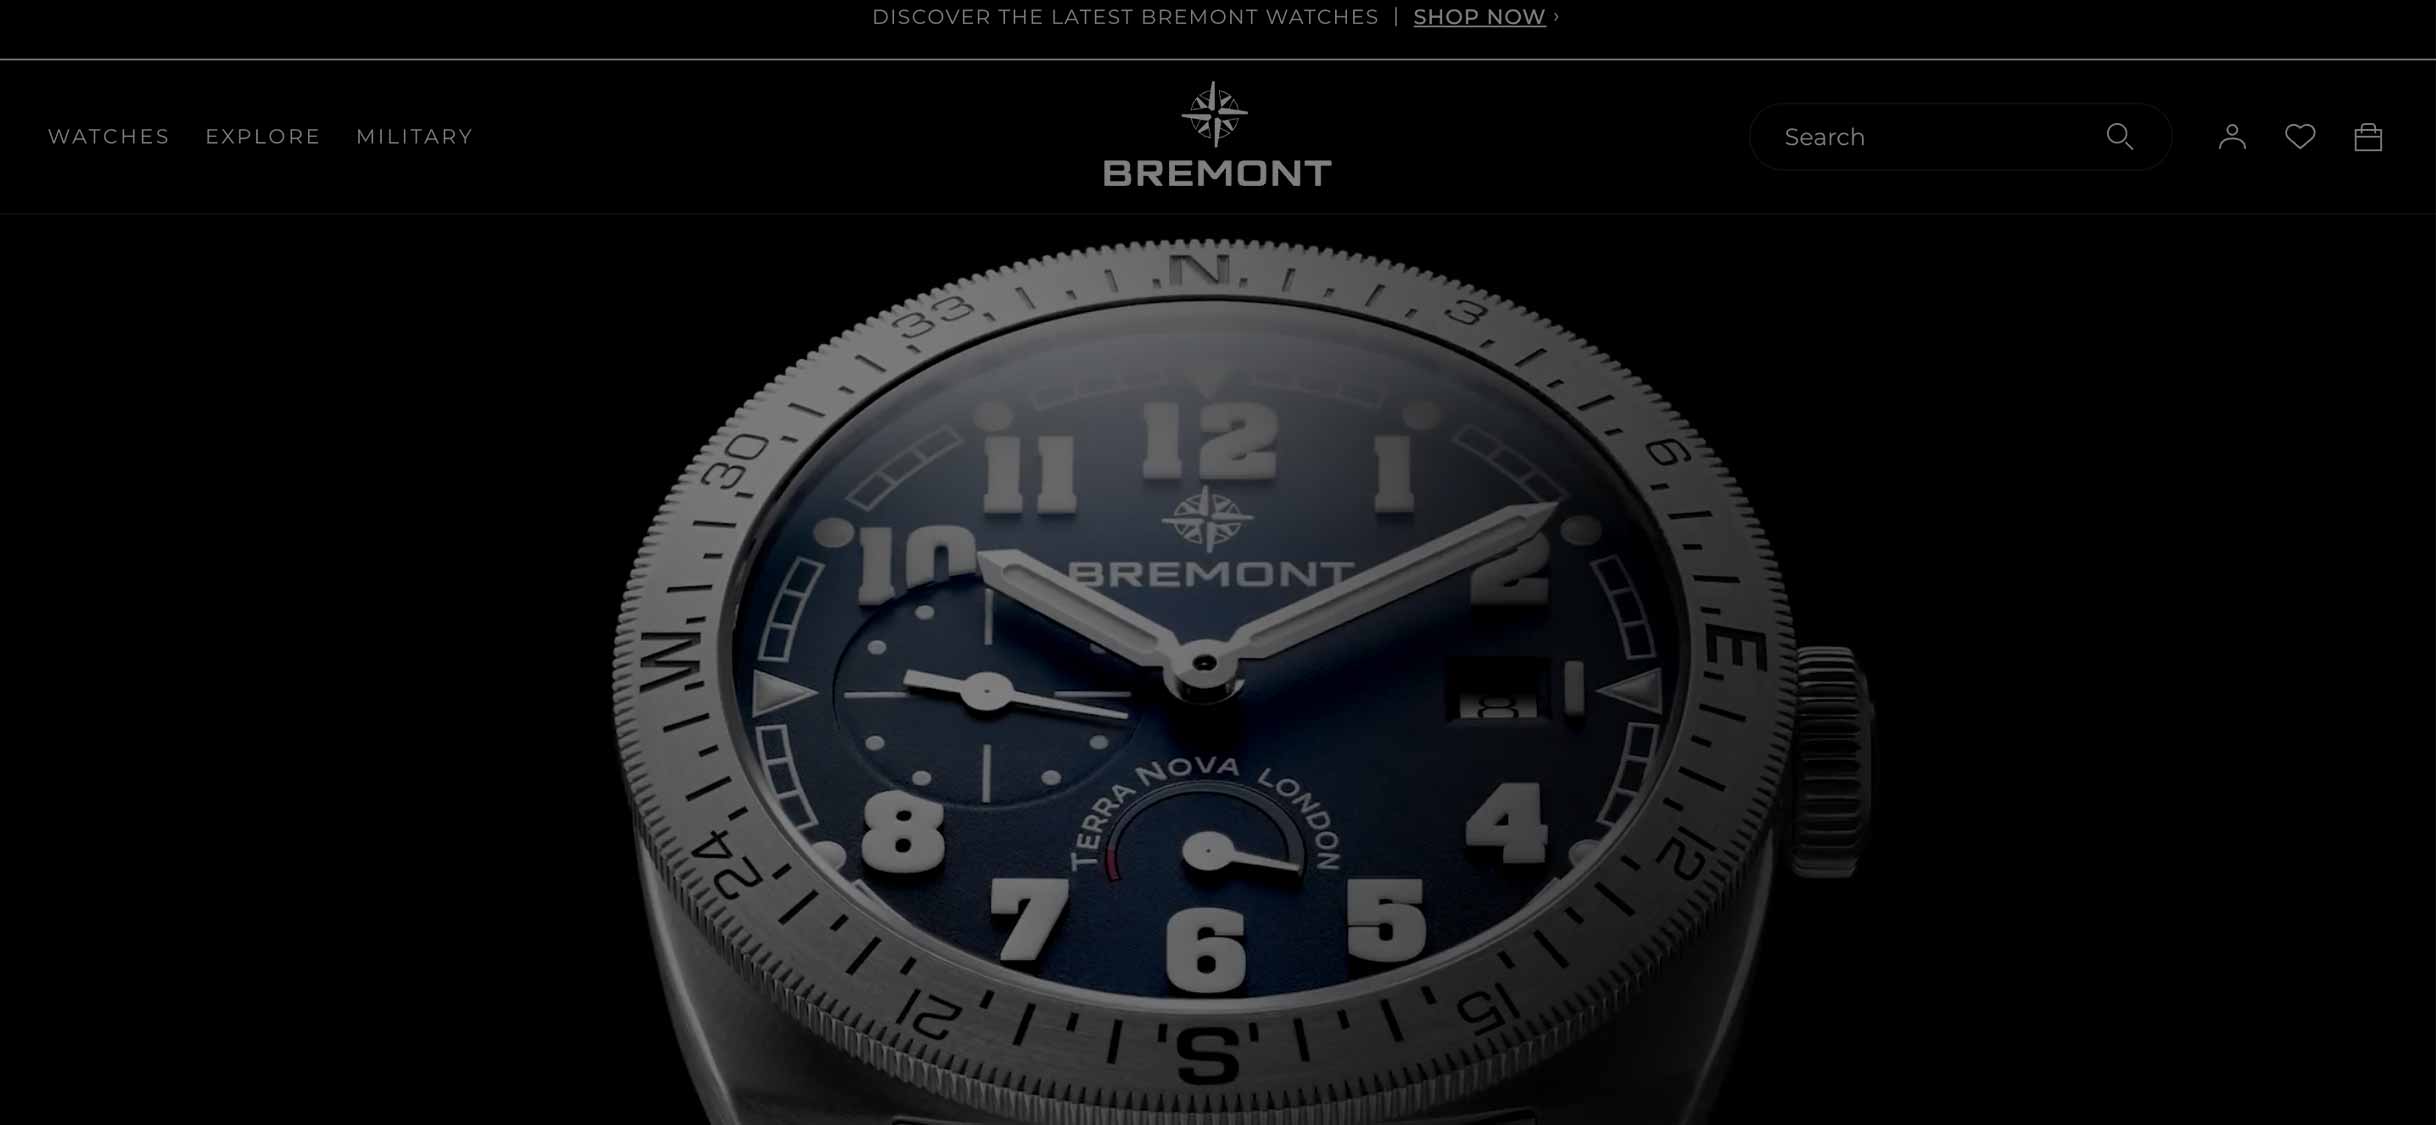 End of Bremont?